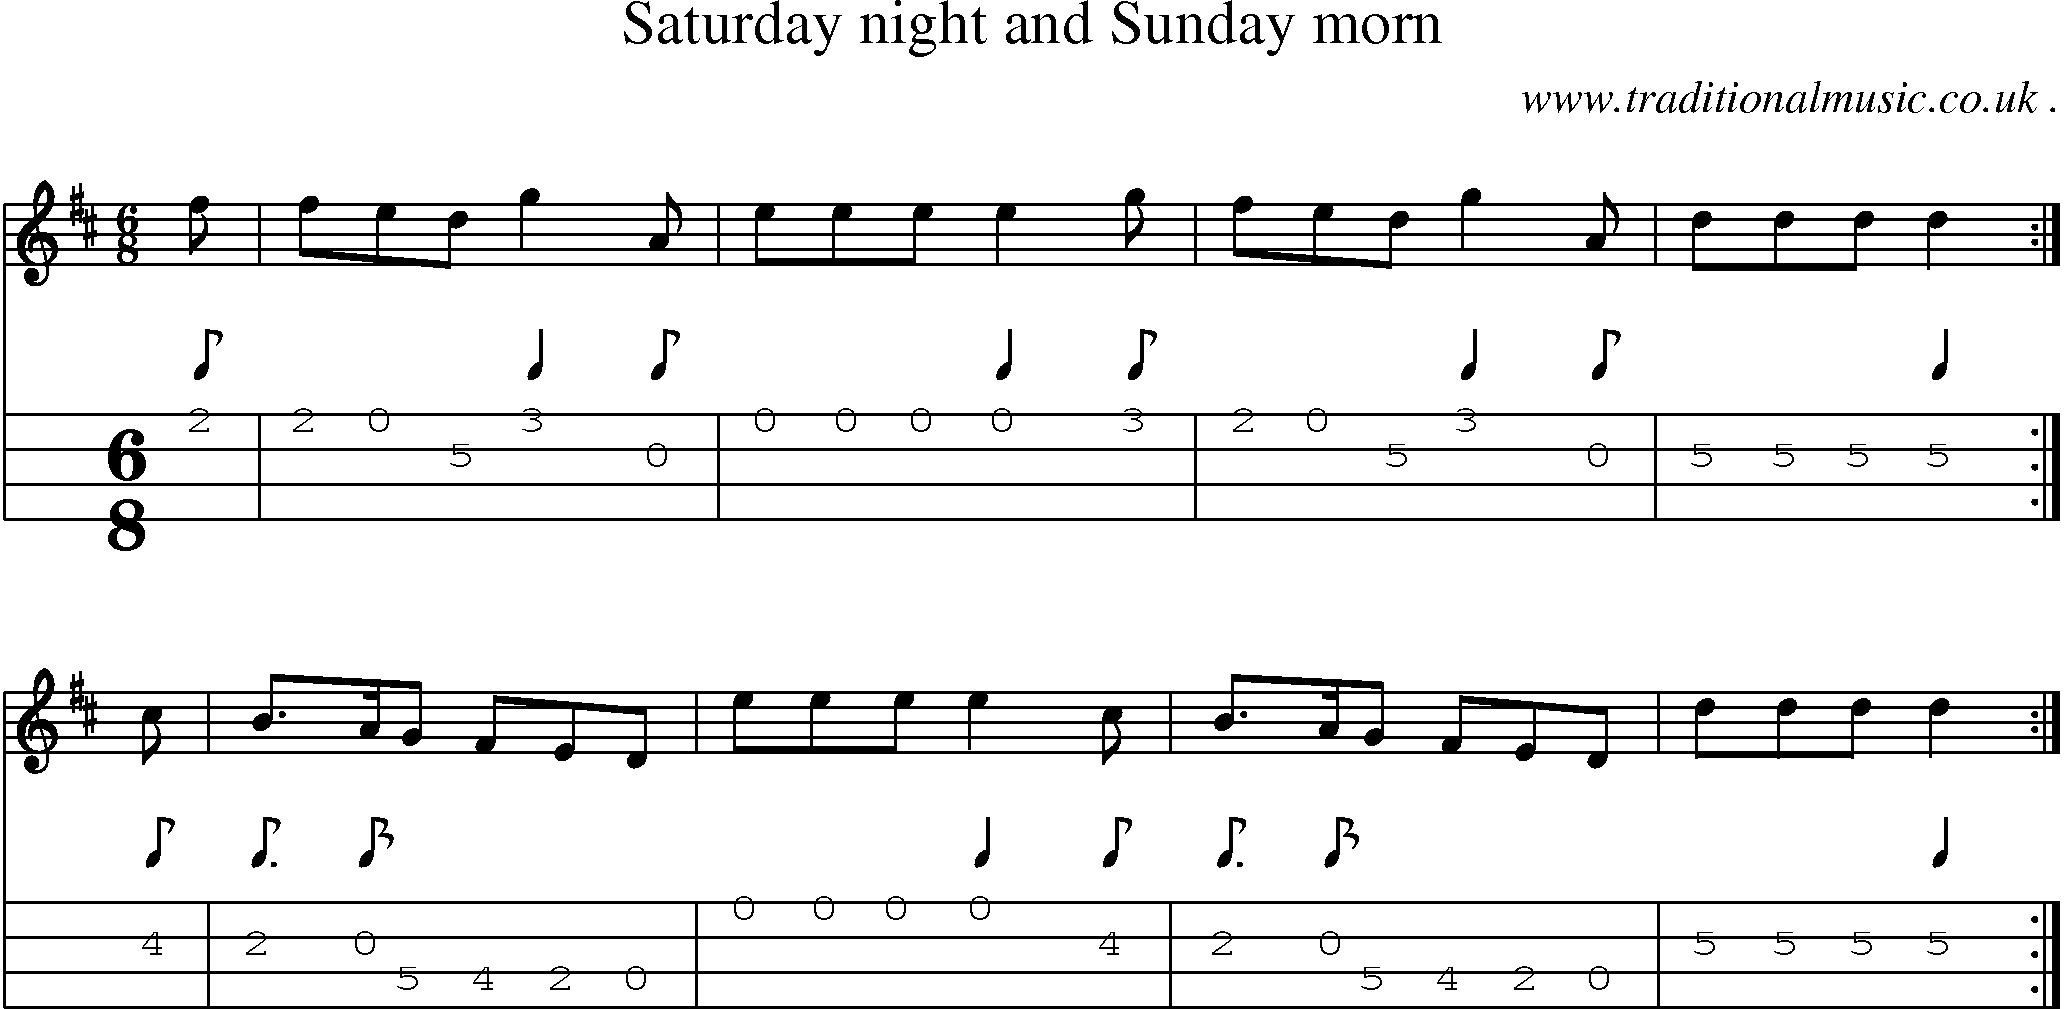 Sheet-music  score, Chords and Mandolin Tabs for Saturday Night And Sunday Morn